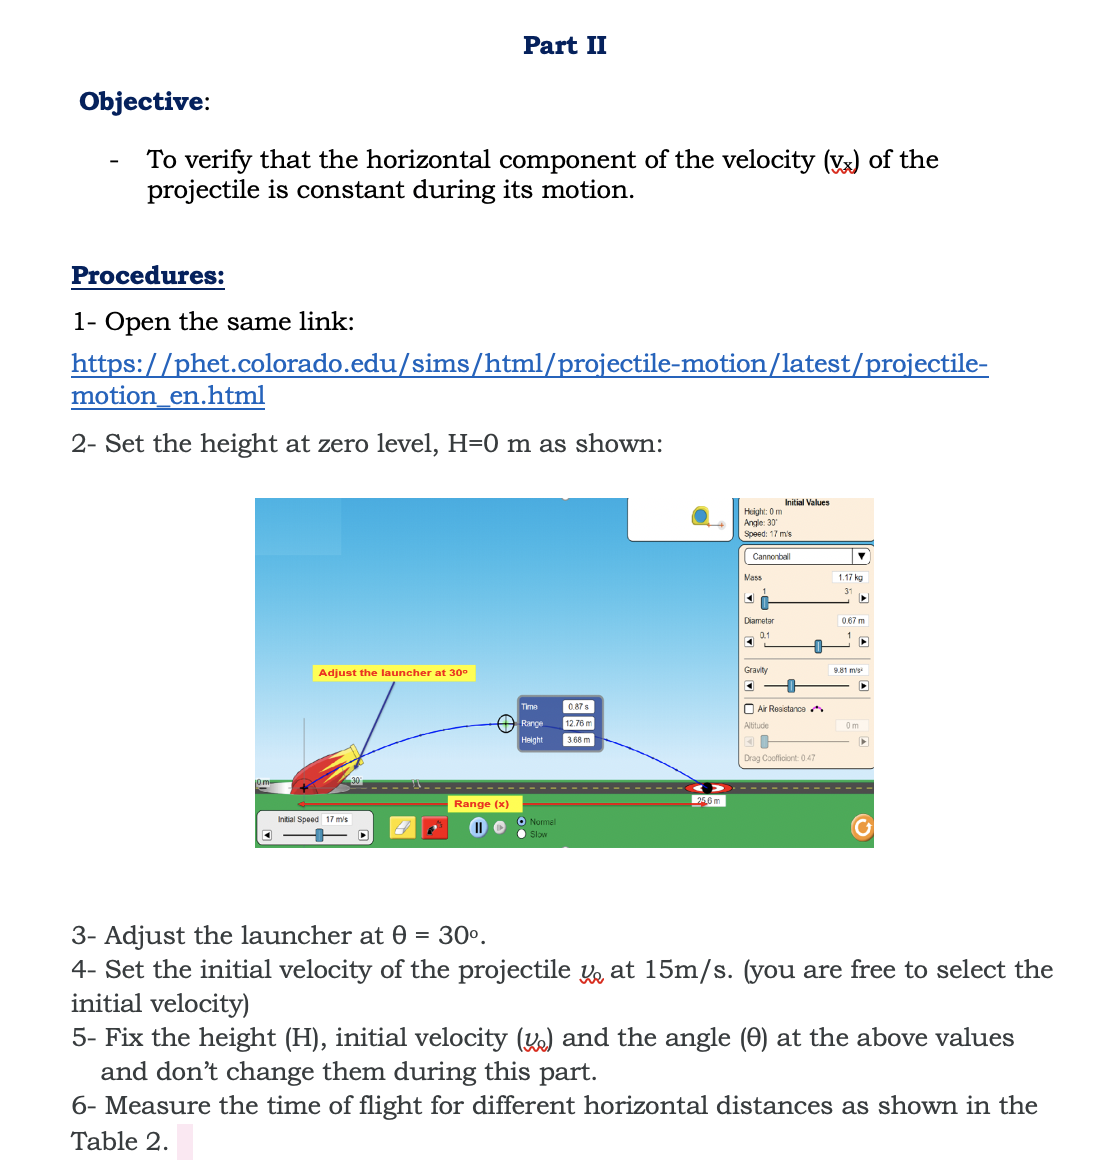 Part II
Objective:
To verify that the horizontal component of the velocity (Vx) of the
projectile is constant during its motion.
Procedures:
1- Open the same link:
https://phet.colorado.edu/sims/html/projectile-motion/latest/projectile-
motion_en.html
2- Set the height at zero level, H=0 m as shown:
Initial Values
Height: 0 m
Angle: 30
Speed: 17 m's
Cannonball
Mass
1.17 kg
Diametar
0.67 m
Adjust the launcher at 30°
Gravity
9.81 m's
Time
0.87s
O Air Rosistance A
Range
12.76 m
Altitude
Helght
3.68 m
Drag Cooficiont 0.47
Range (x)
266 m
Intial Speed 17 mis
II O
O Normel
• Slow
3- Adjust the launcher at 0
4- Set the initial velocity of the projectile y at 15m/s. (you are free to select the
initial velocity)
5- Fix the height (H), initial velocity (K) and the angle (0) at the above values
and don't change them during this part.
6- Measure the time of flight for different horizontal distances as shown in the
30°.
Table 2.
